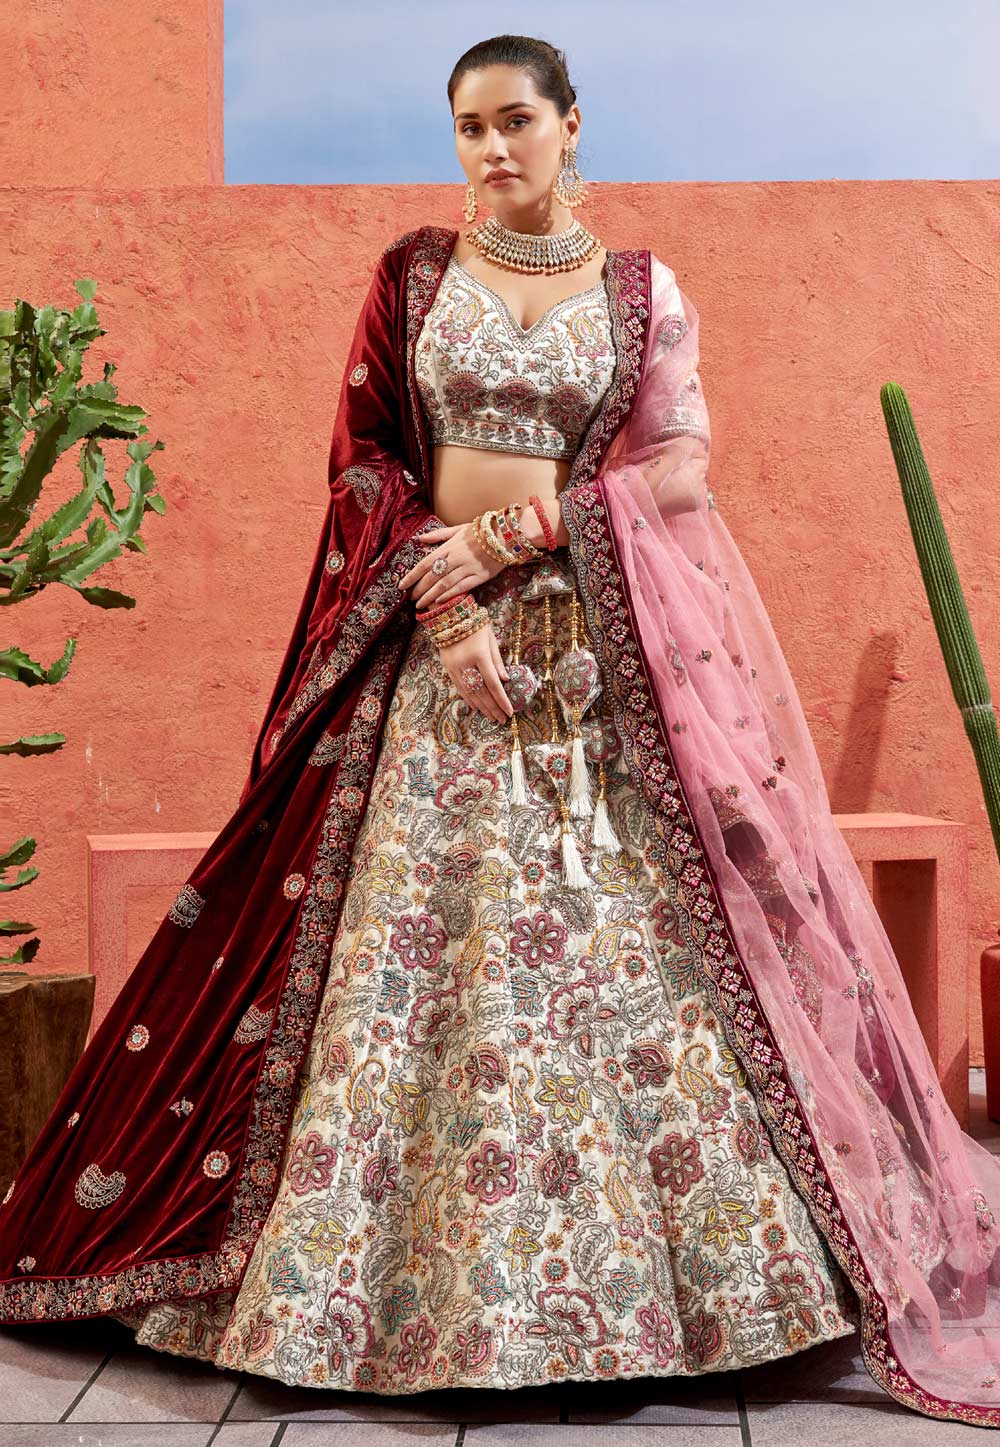 Photo of Red and white bridal lehenga with green jewellery